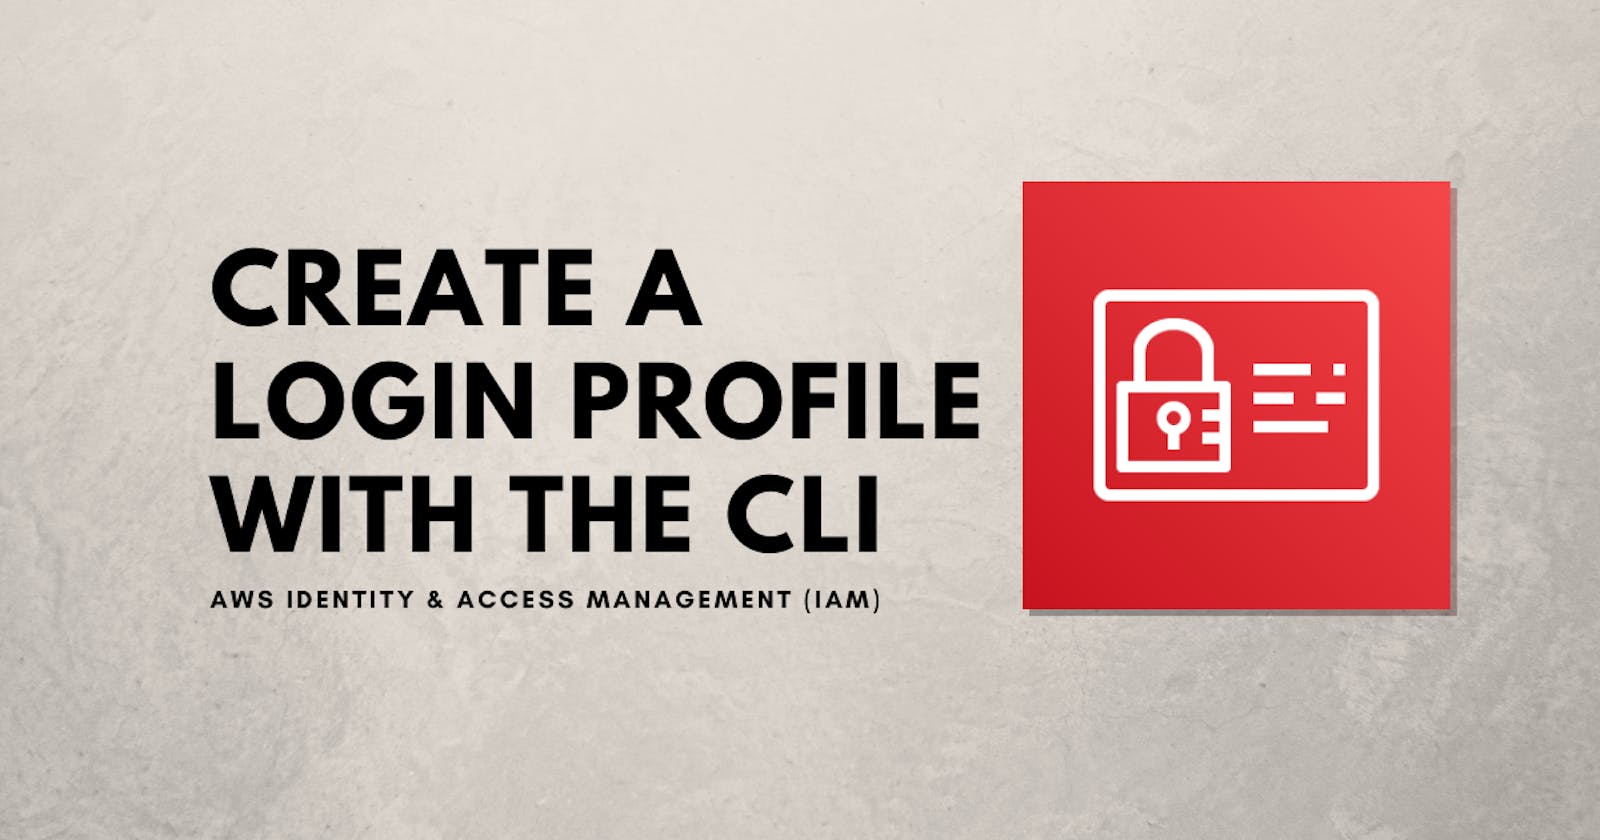 How to create a login profile and a password for an AWS IAM user with the CLI